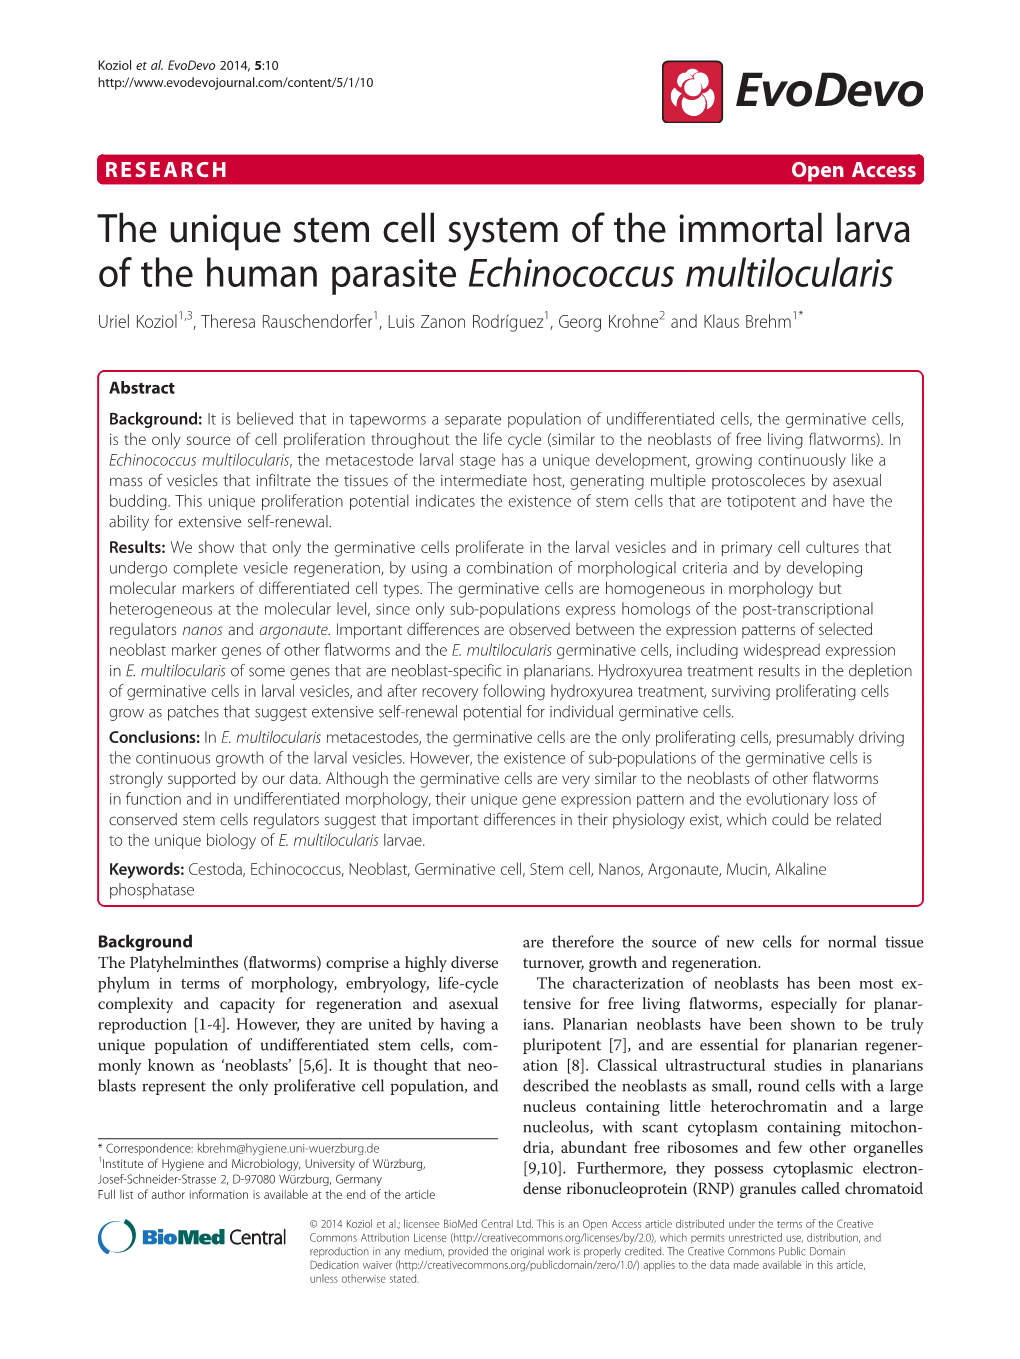 The Unique Stem Cell System of the Immortal Larva of the Human